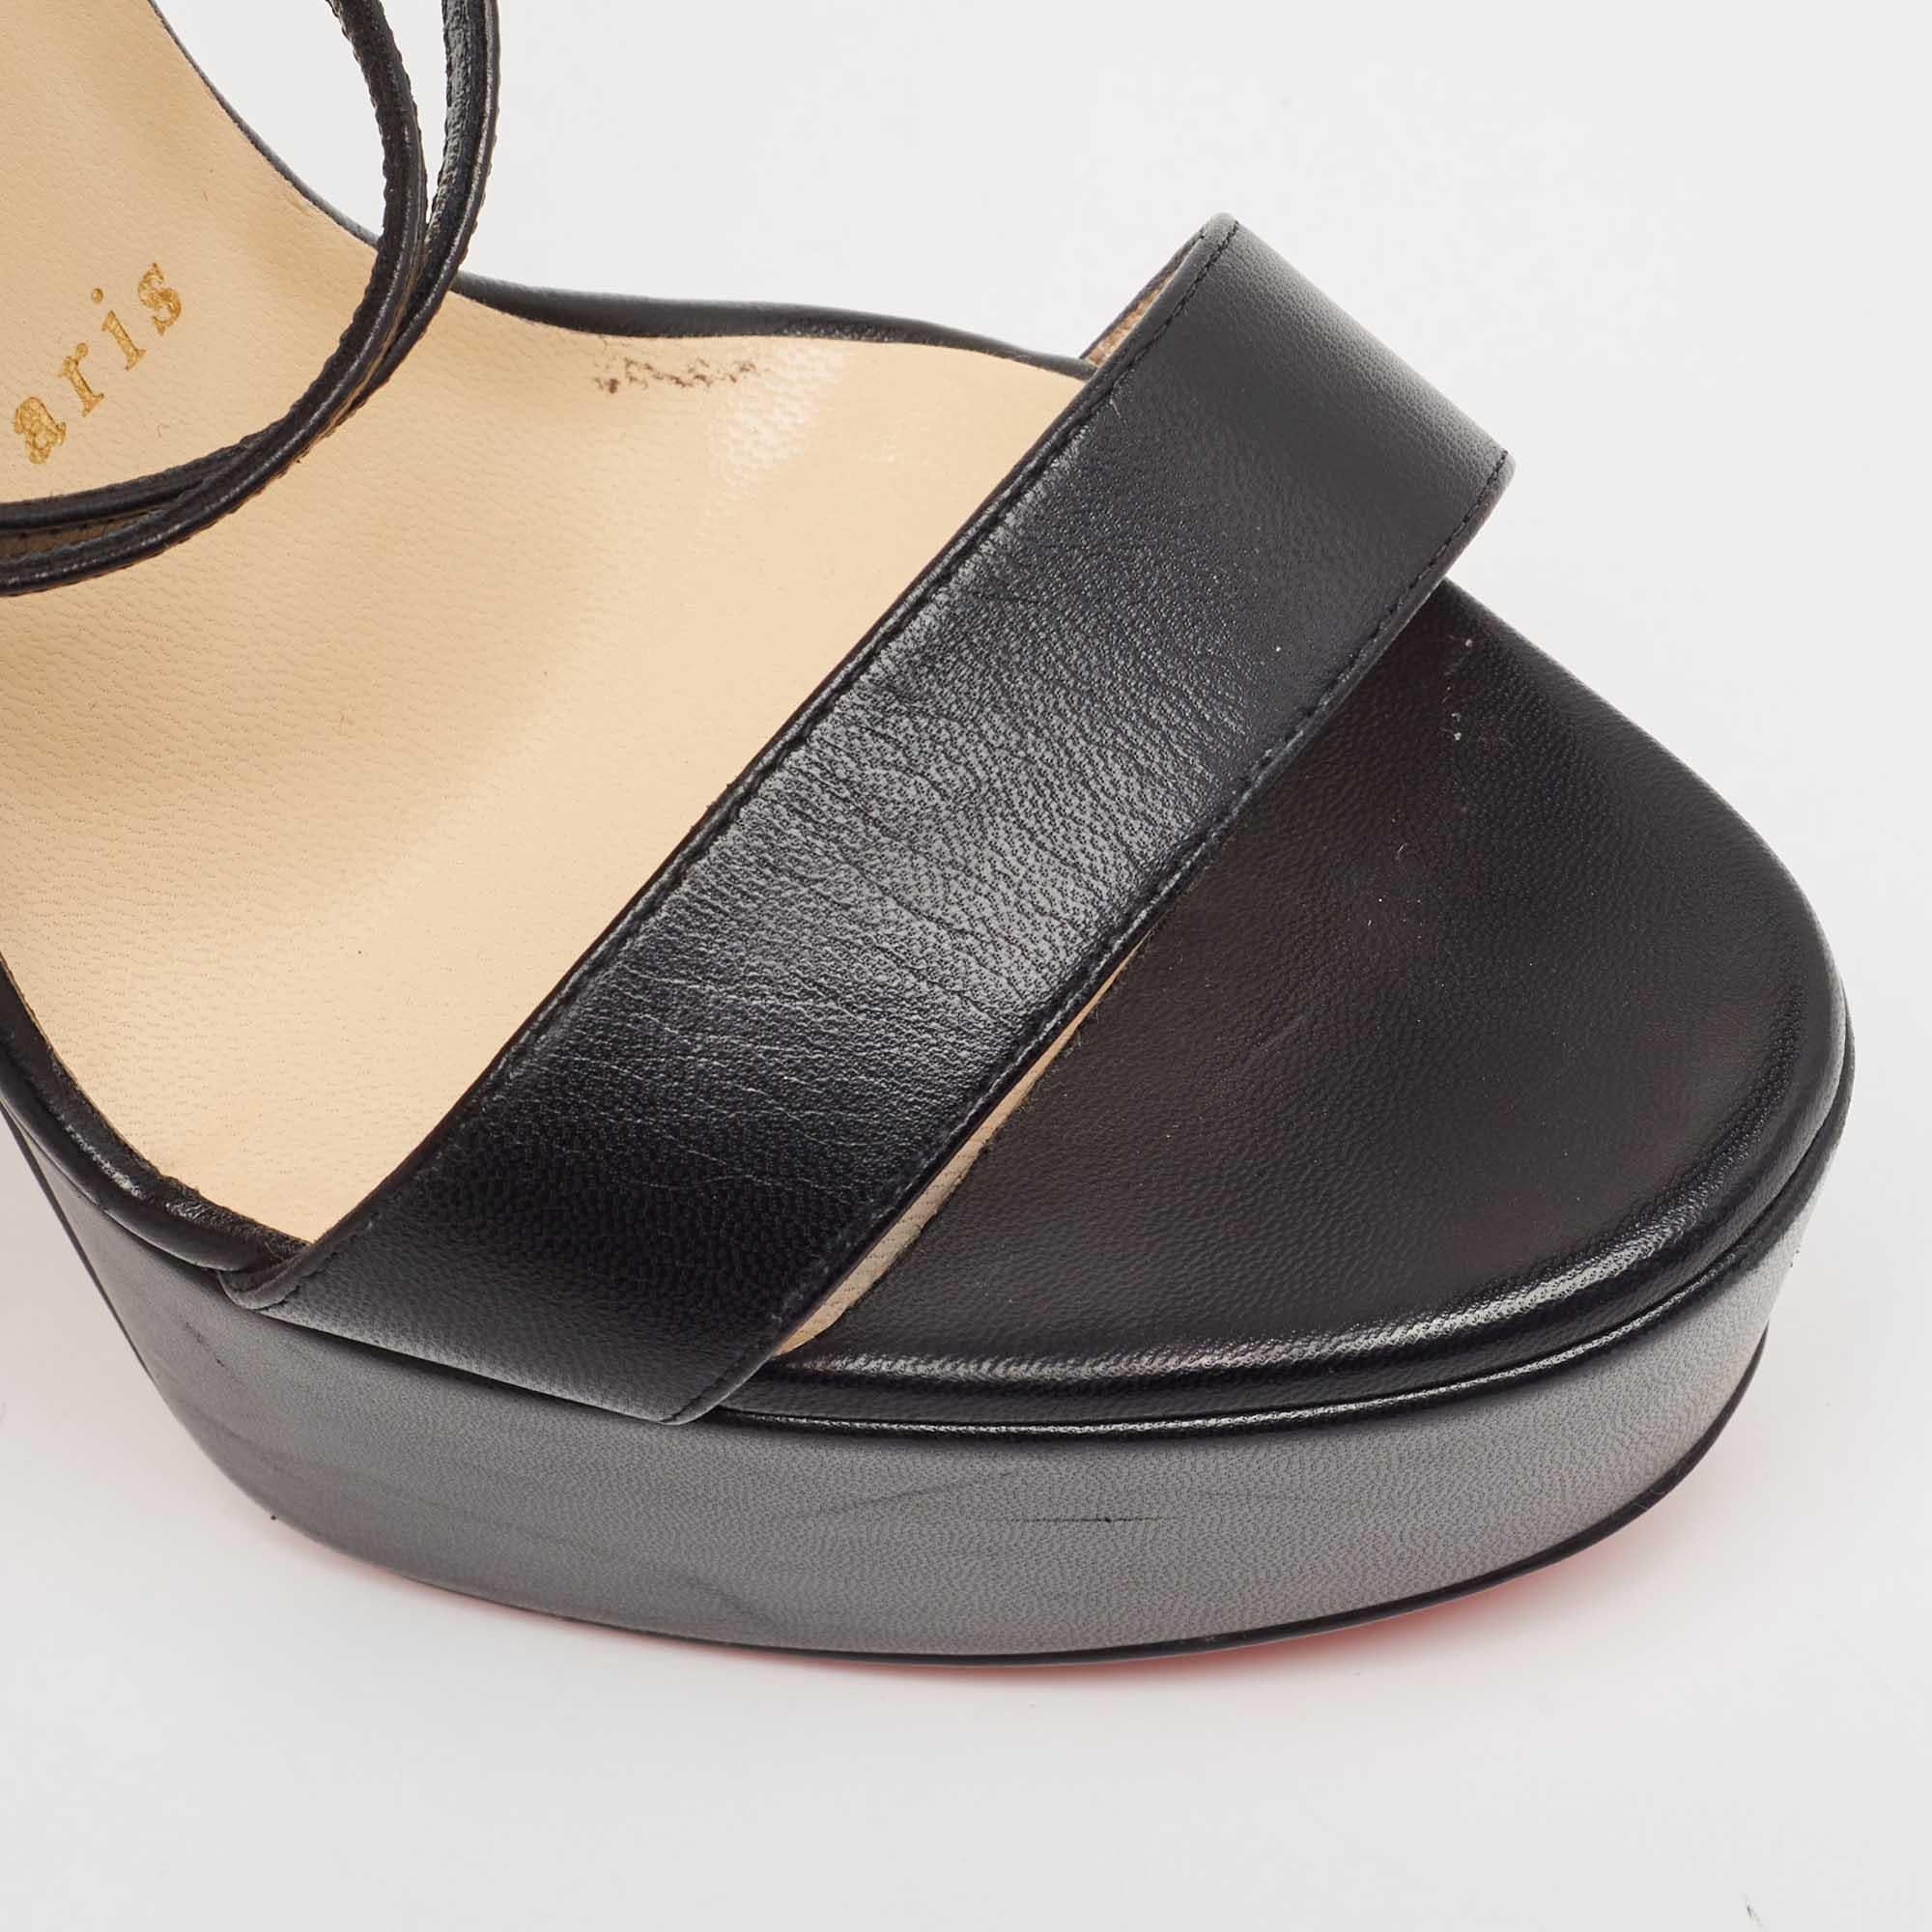 Christian Louboutin Black Leather Choca Sandals Size 37.5 For Sale 5